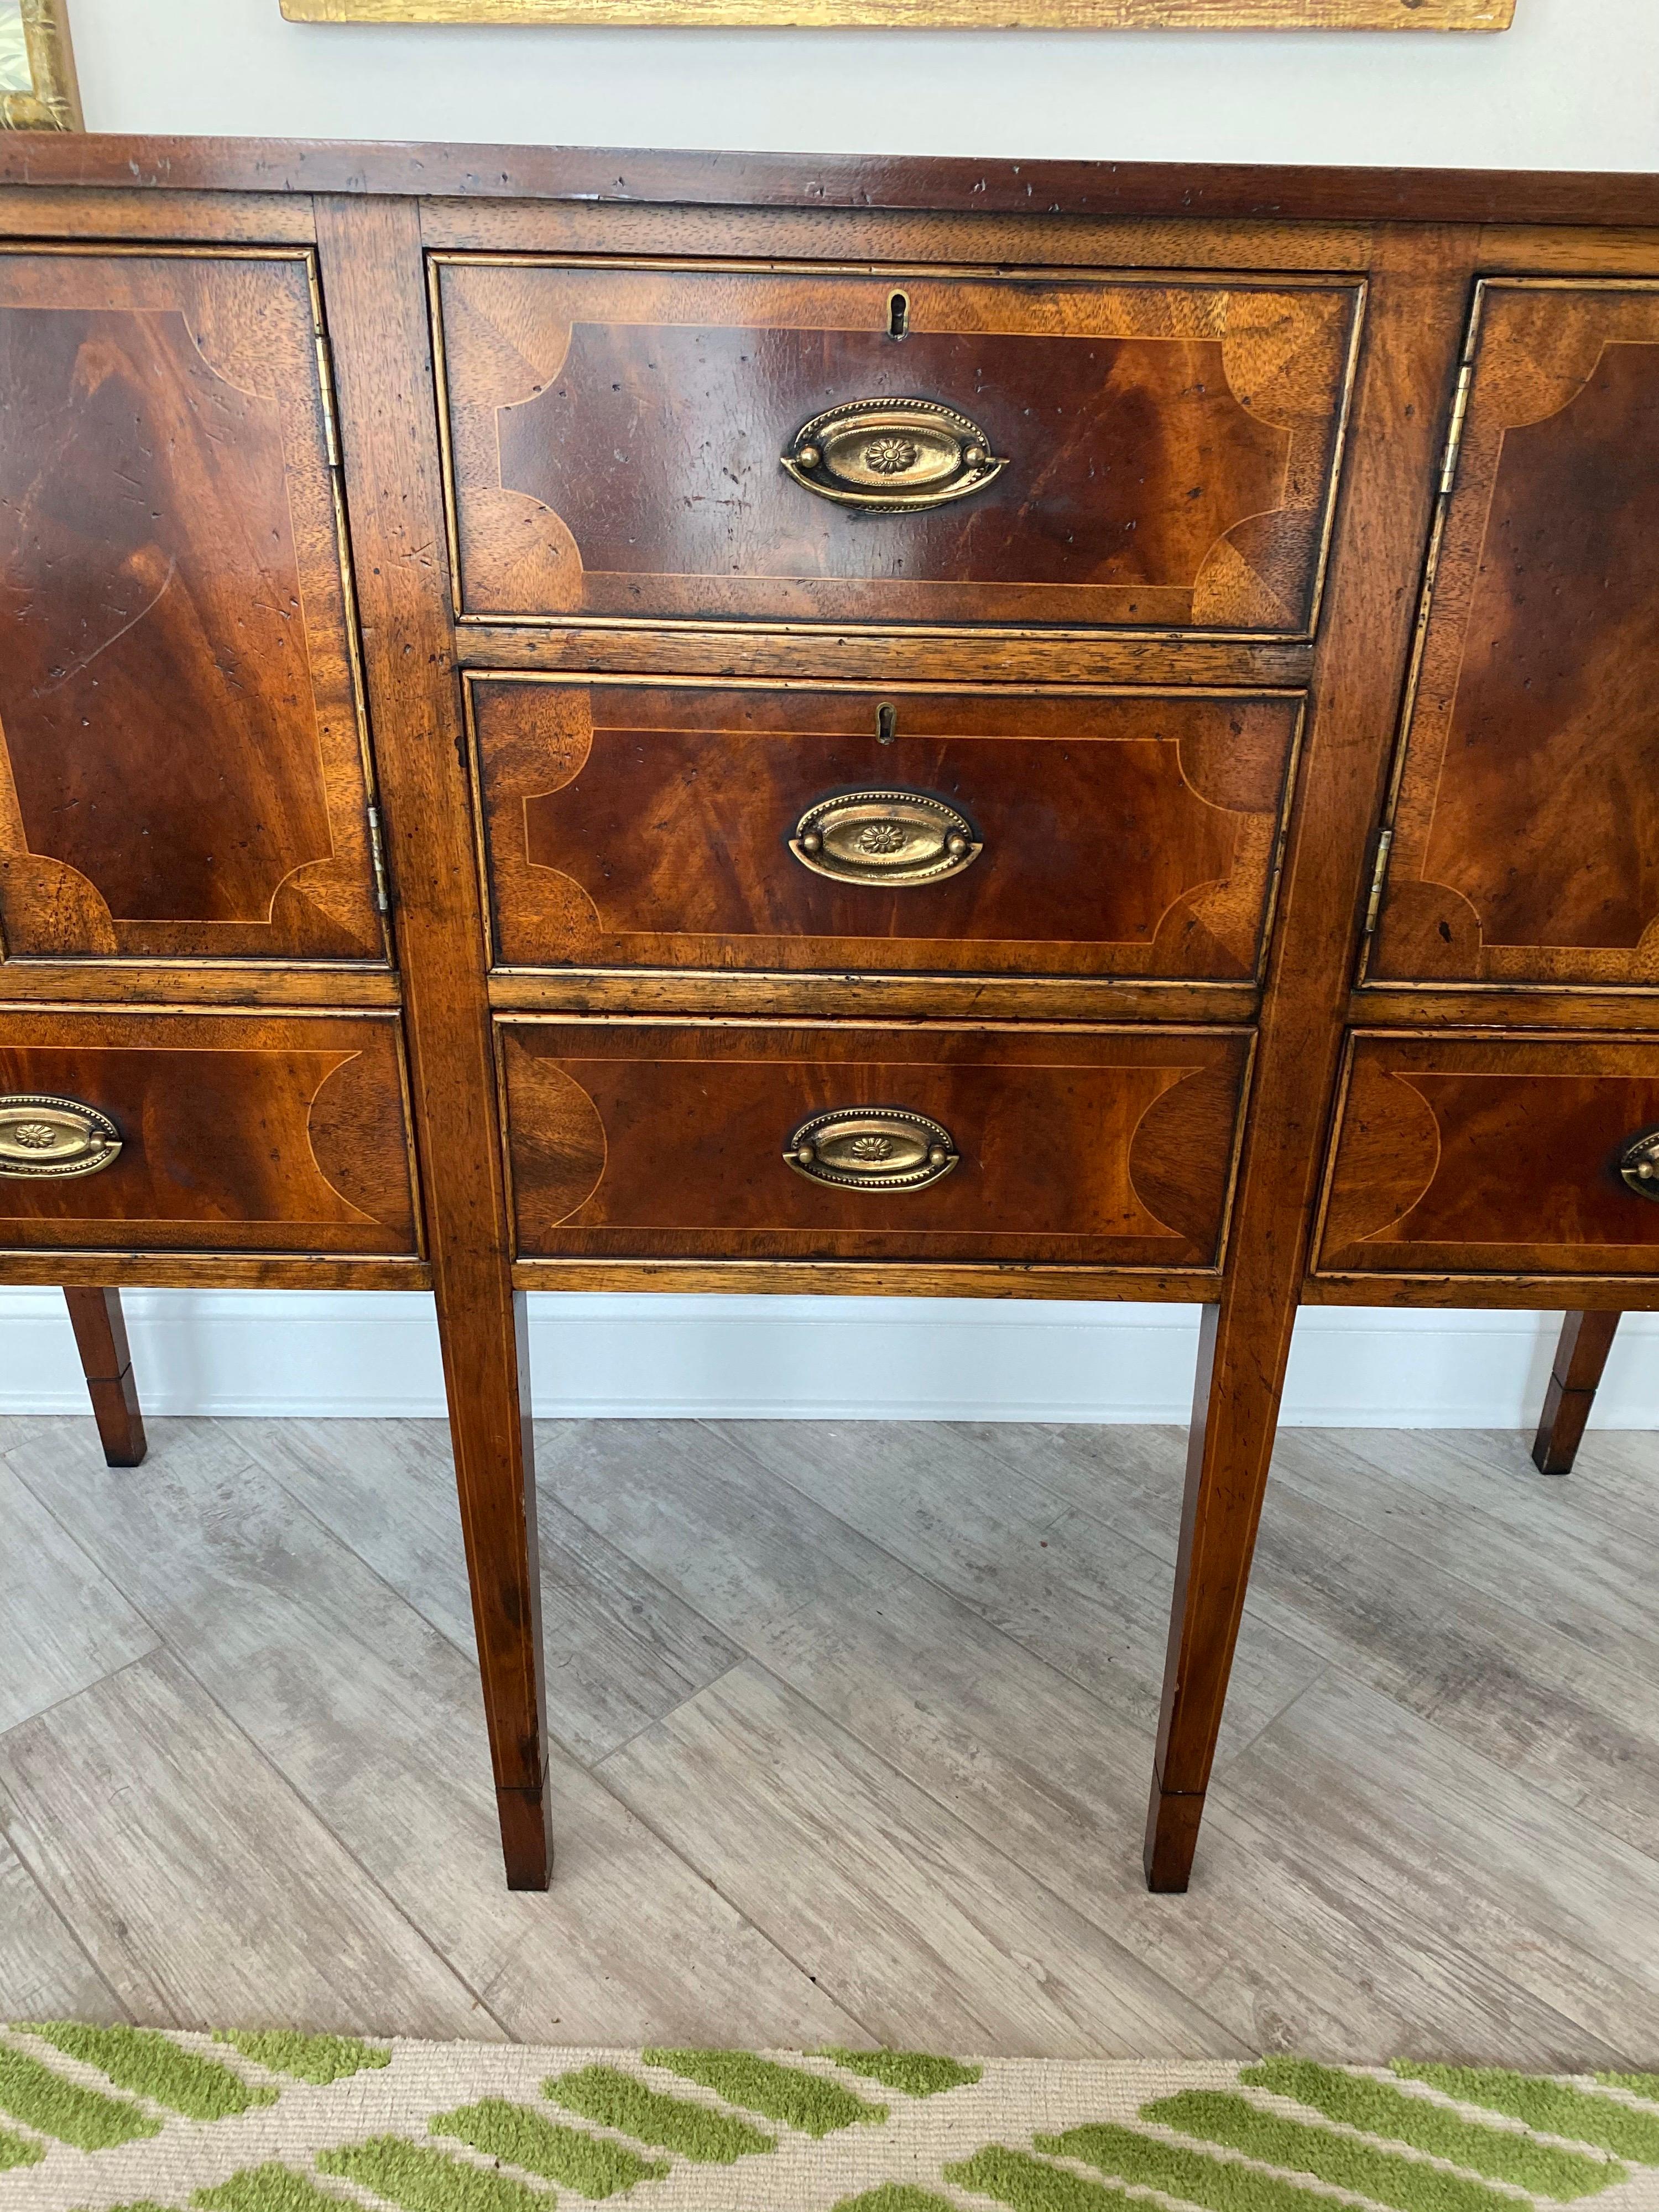 Vintage Inlaid English Sideboard In Good Condition For Sale In West Palm Beach, FL